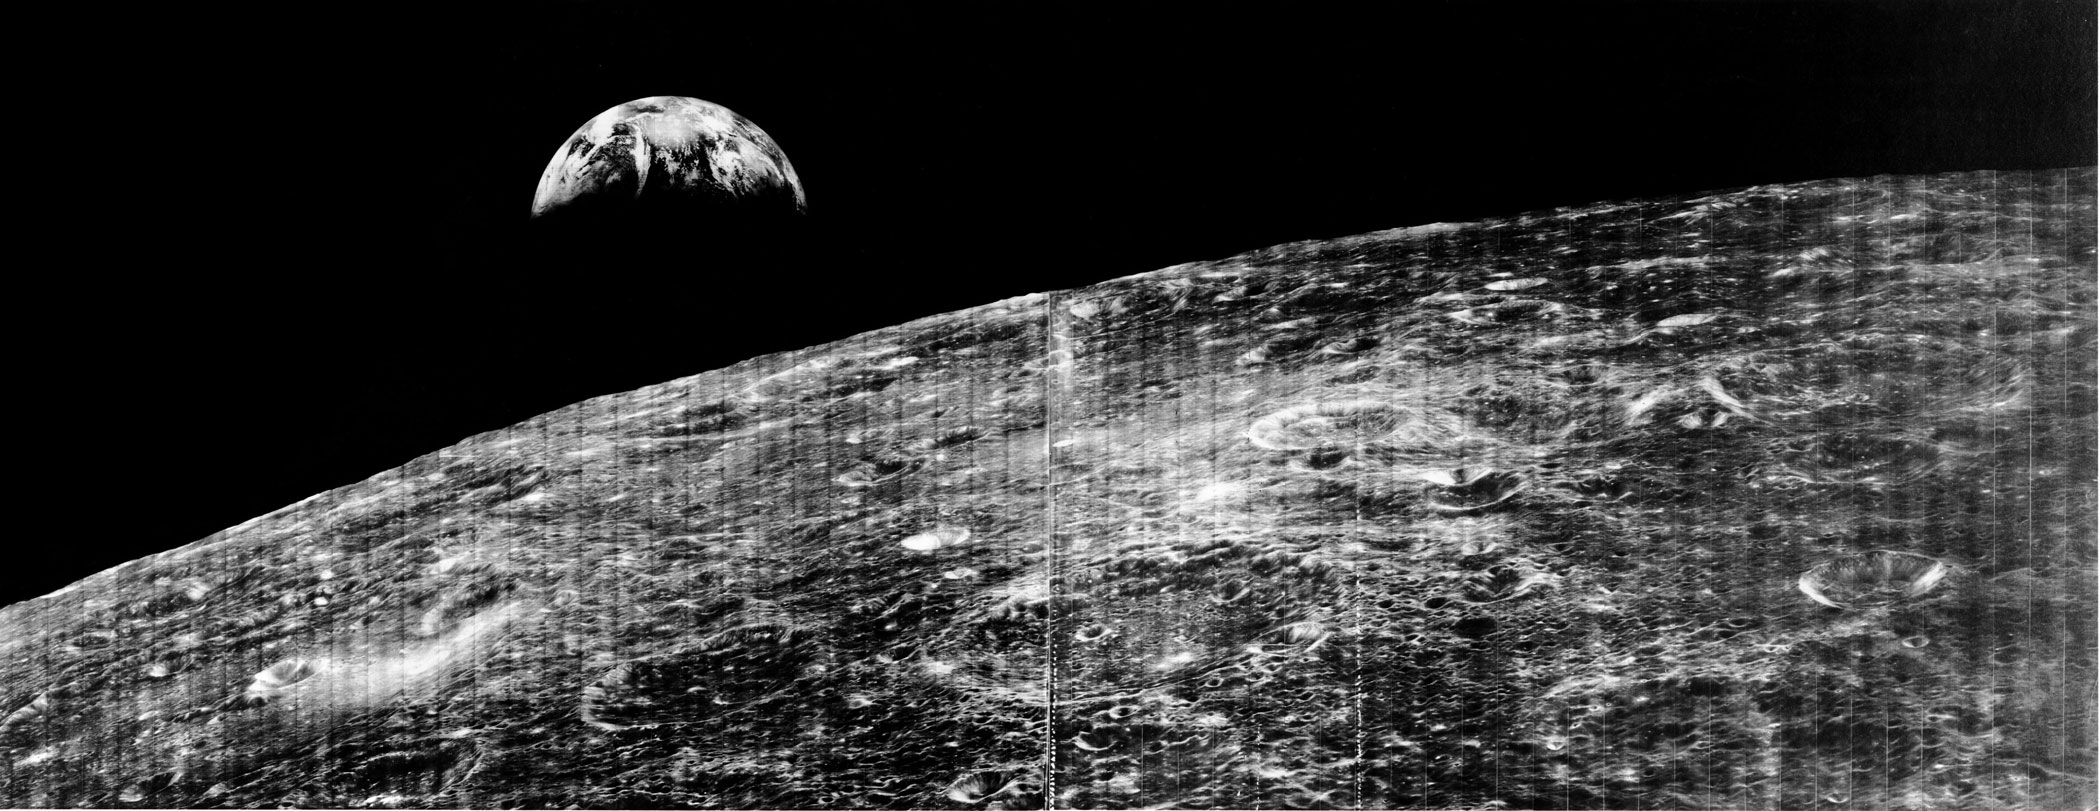 The First Photo of the Earth, 1966; On Aug. 23, 1966, the world received its first view of Earth taken by the Lunar Orbiter I from the vicinity of the Moon.